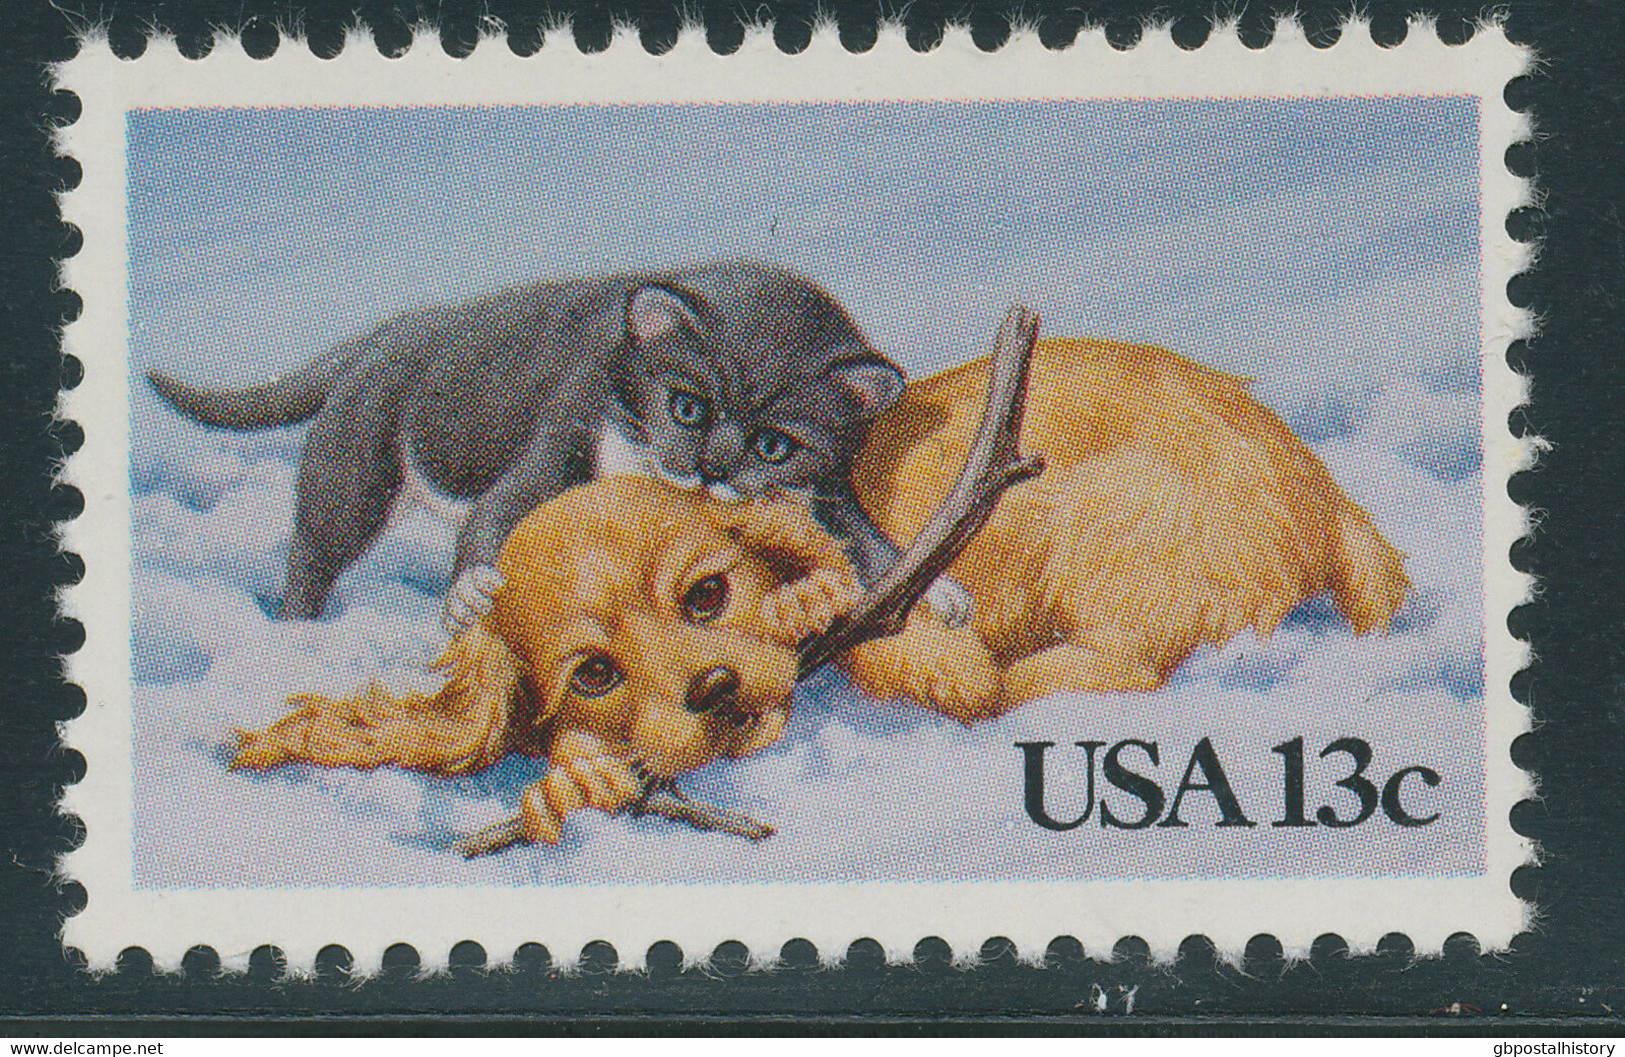 USA 1982 Christmas Kitten & Puppy 13 C. VFU Bl. Of 4 VARIETY MISSING COLORS - Errors, Freaks & Oddities (EFOs)